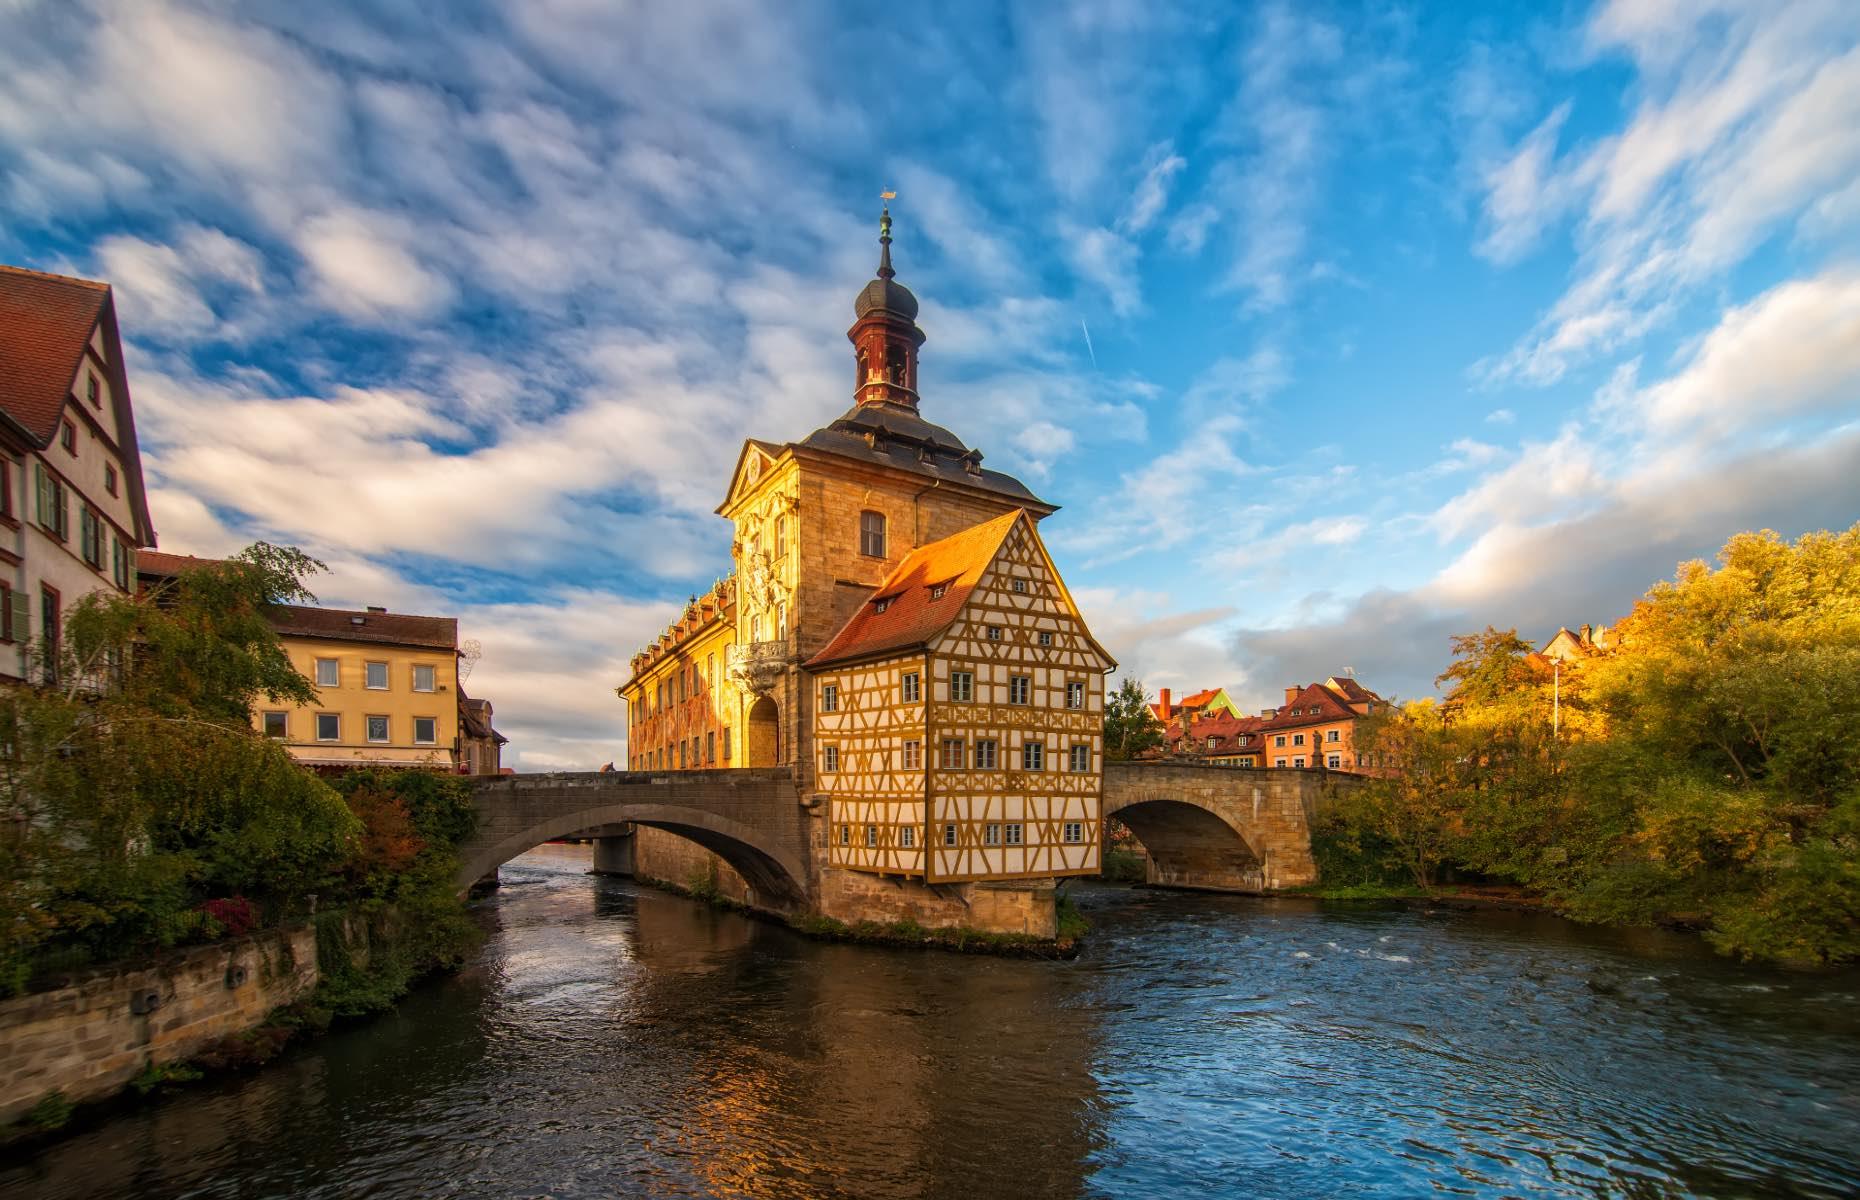 Travel Through Time With These Stunning Medieval Sights